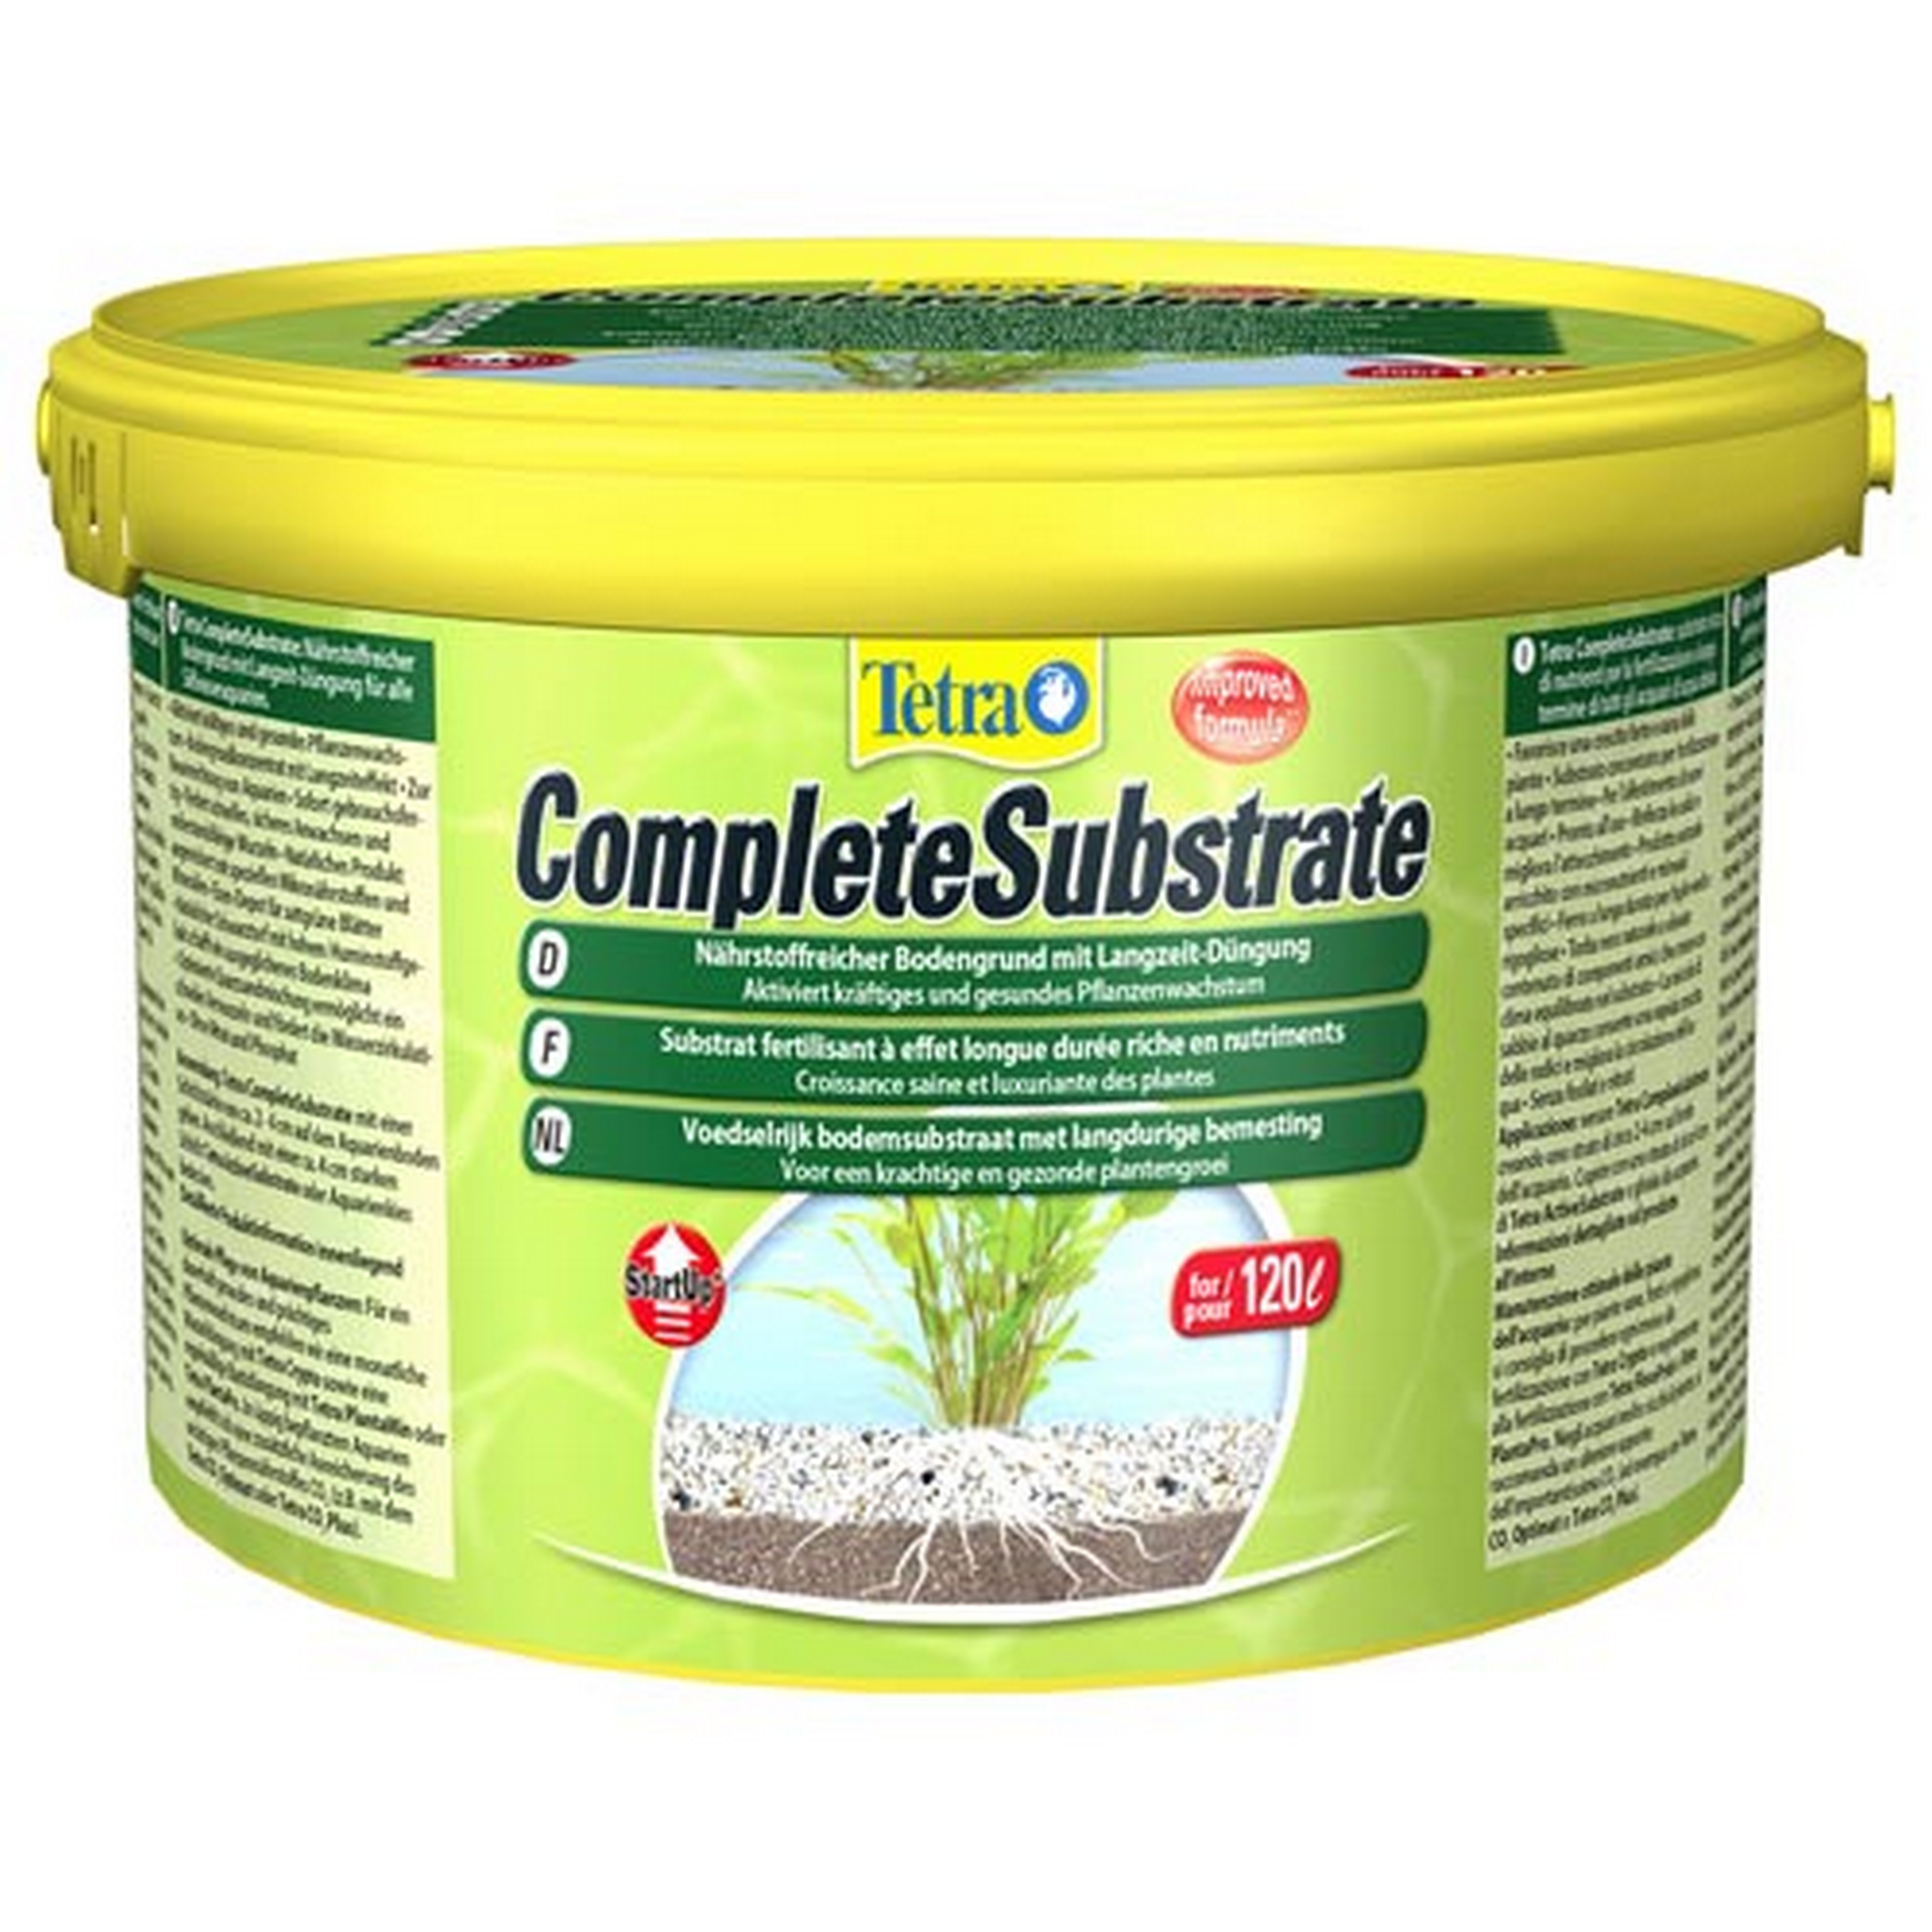 Bodengrund Complete Substrate 5 kg + product picture